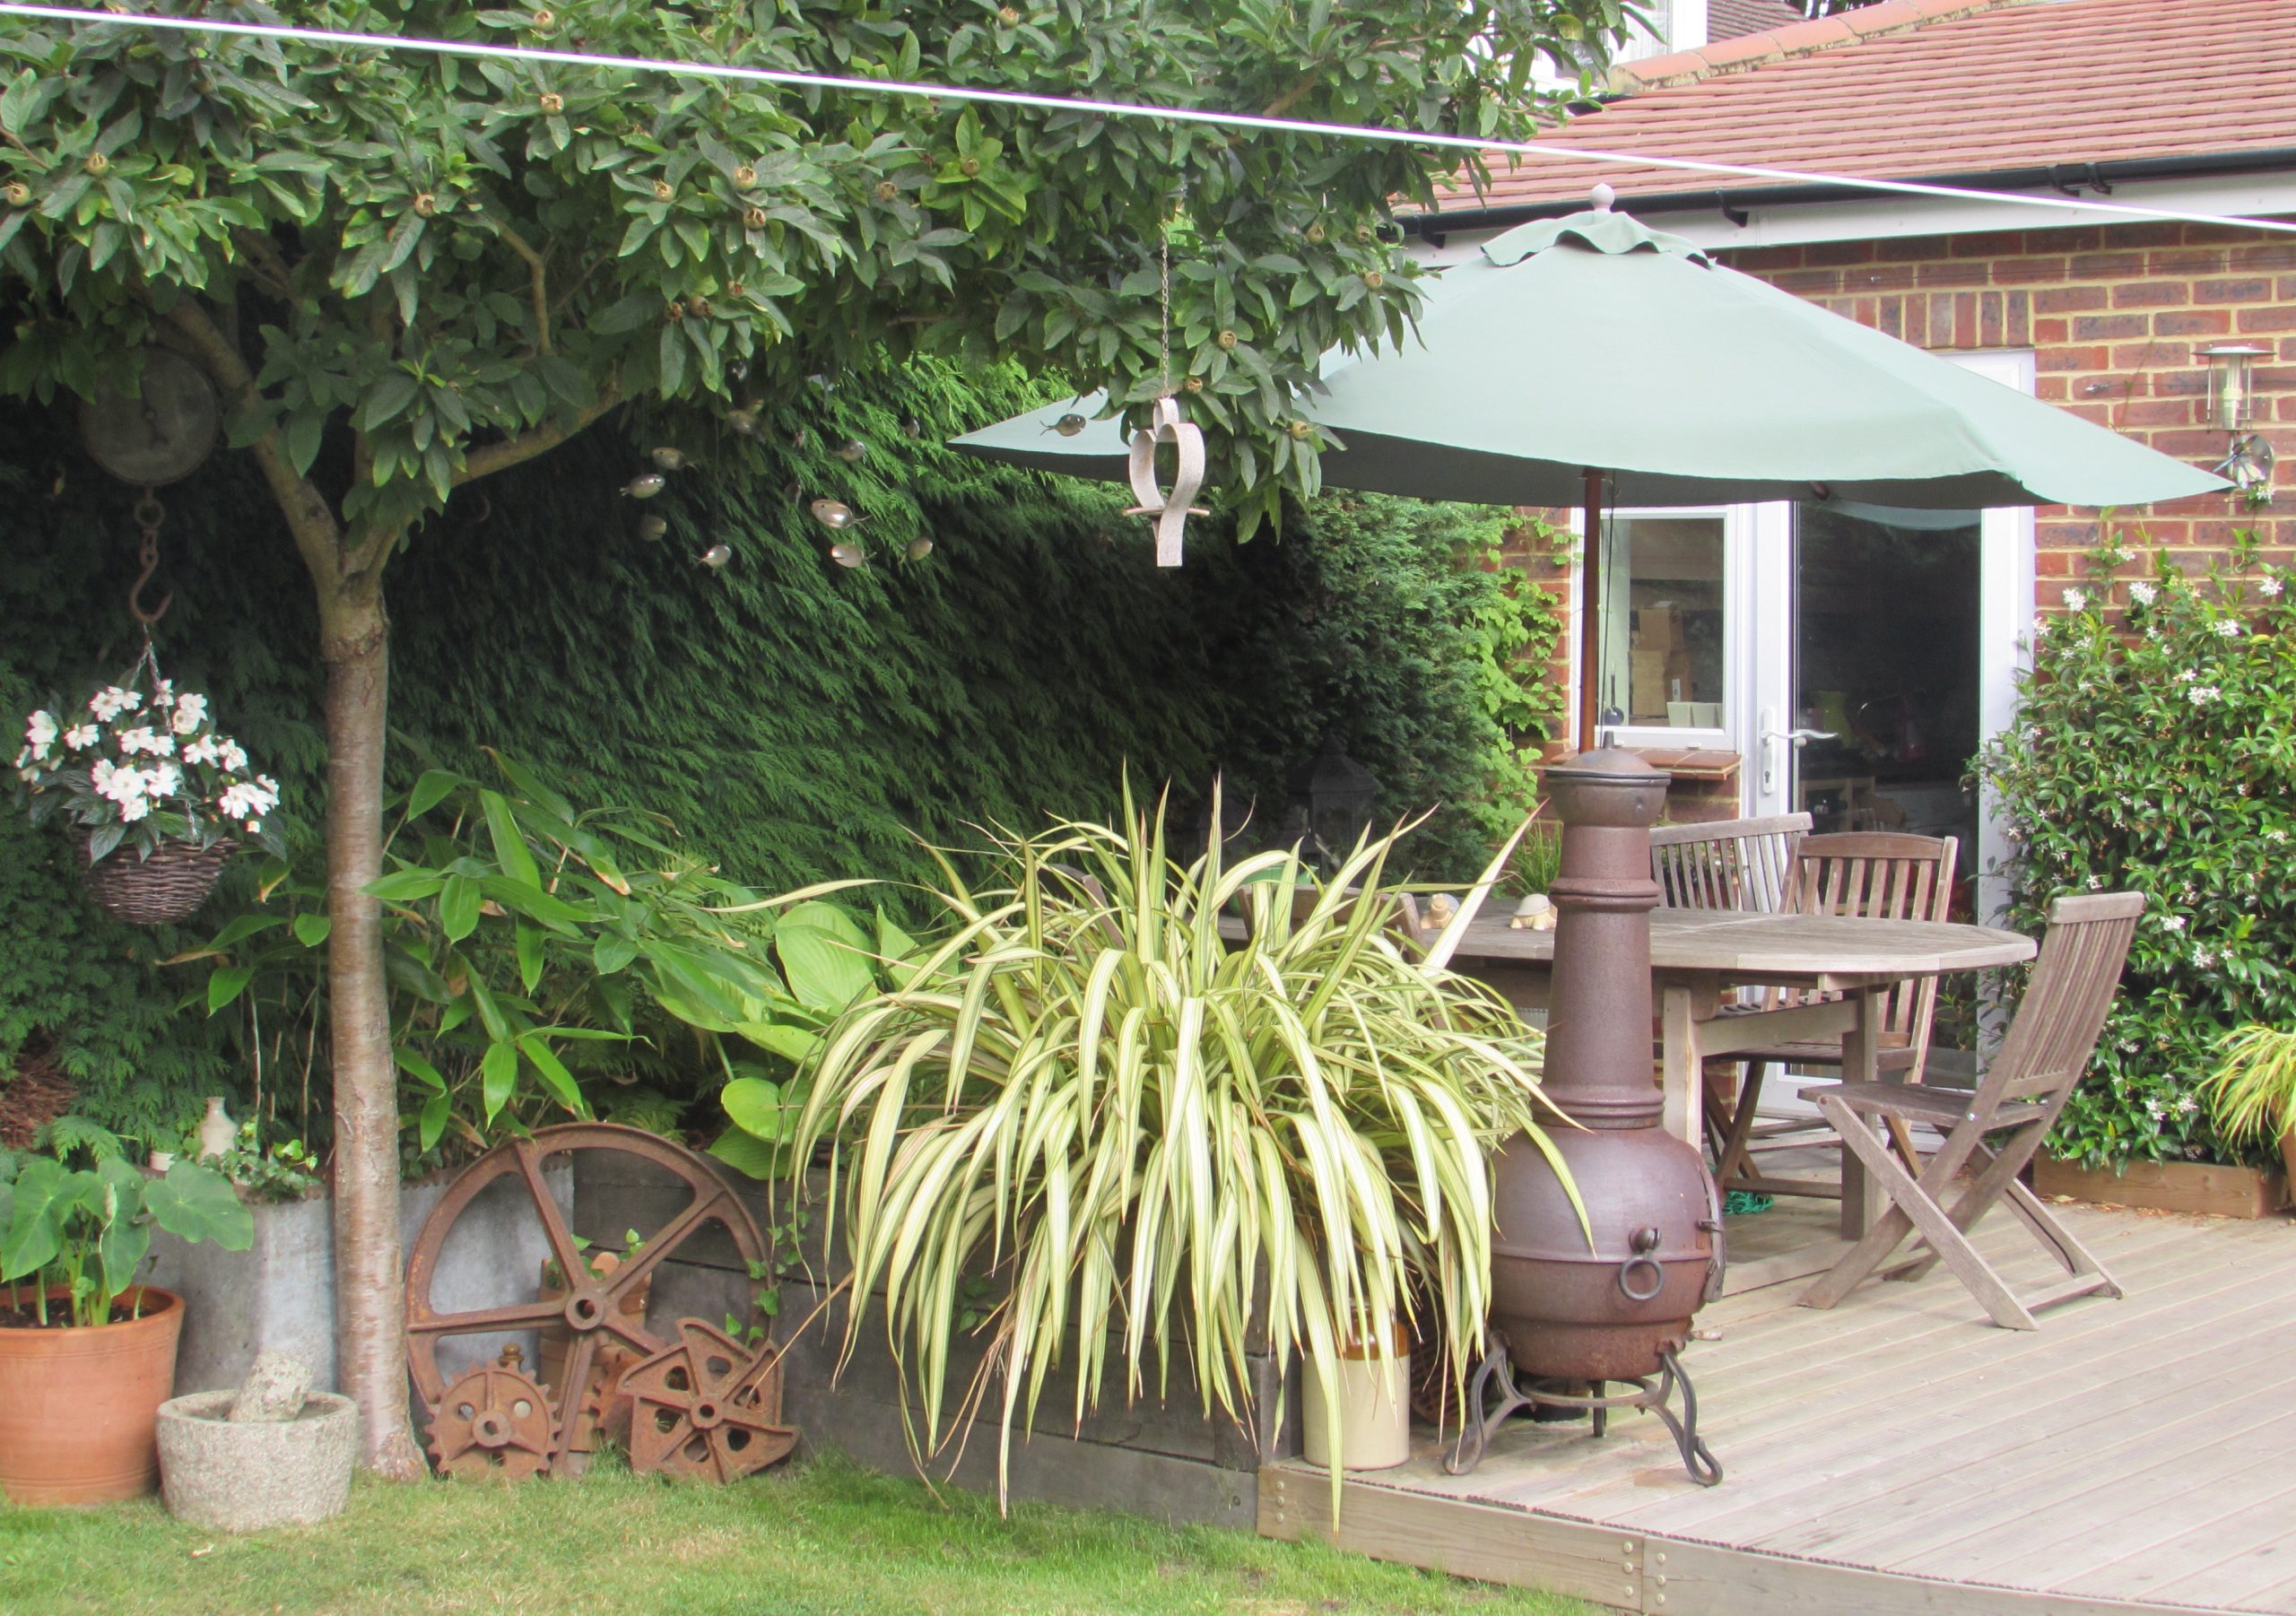 Any old iron. The vintage rusty metal, oak sleepers, lush foliage and curved decking make for a laid-back entertaining corner, perfect for unwinding